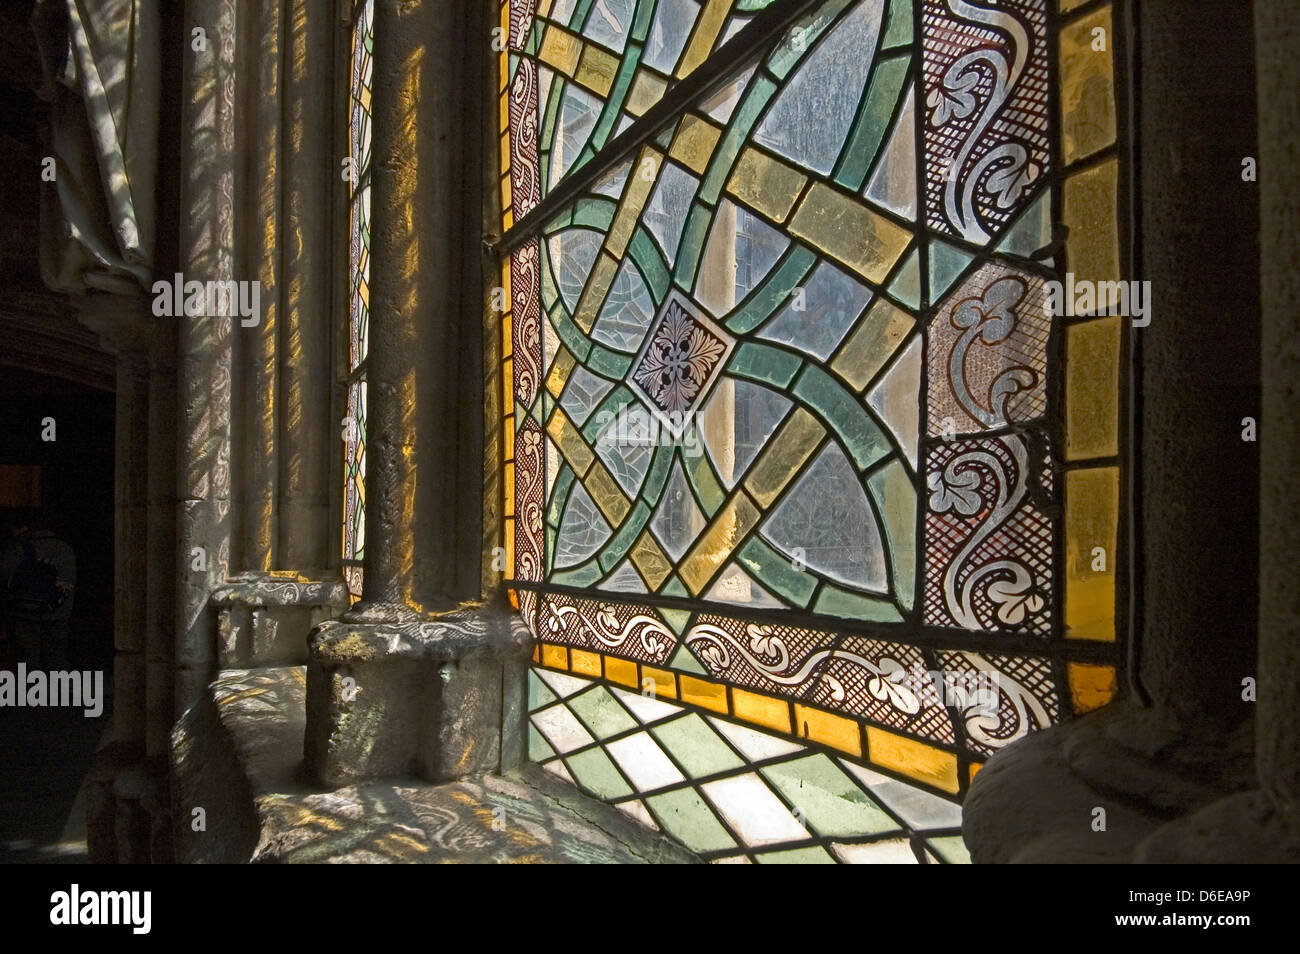 EUROPE, SPAIN, Burgos, Catholic Cathedral (1221), stained glass in cloisters Stock Photo